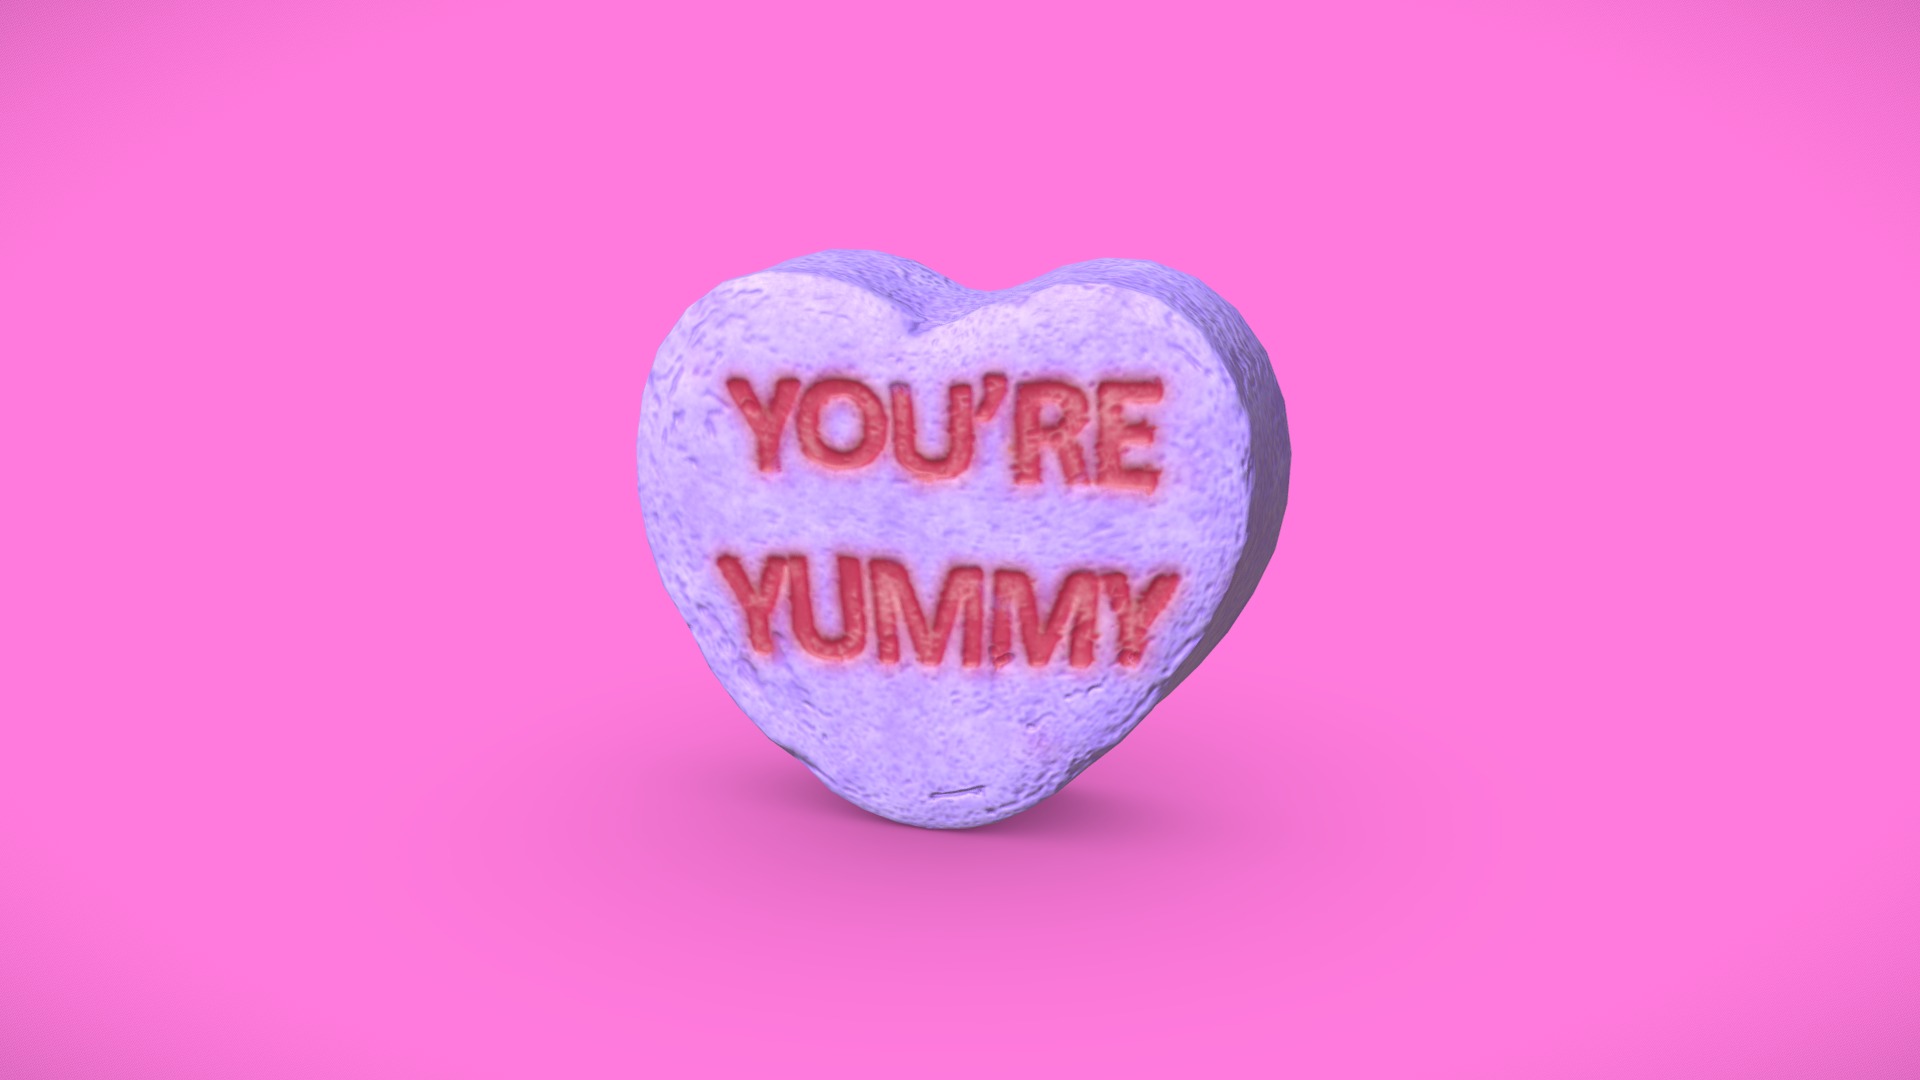 3D model Heart Candy – You’re Yummy - This is a 3D model of the Heart Candy - You're Yummy. The 3D model is about text.